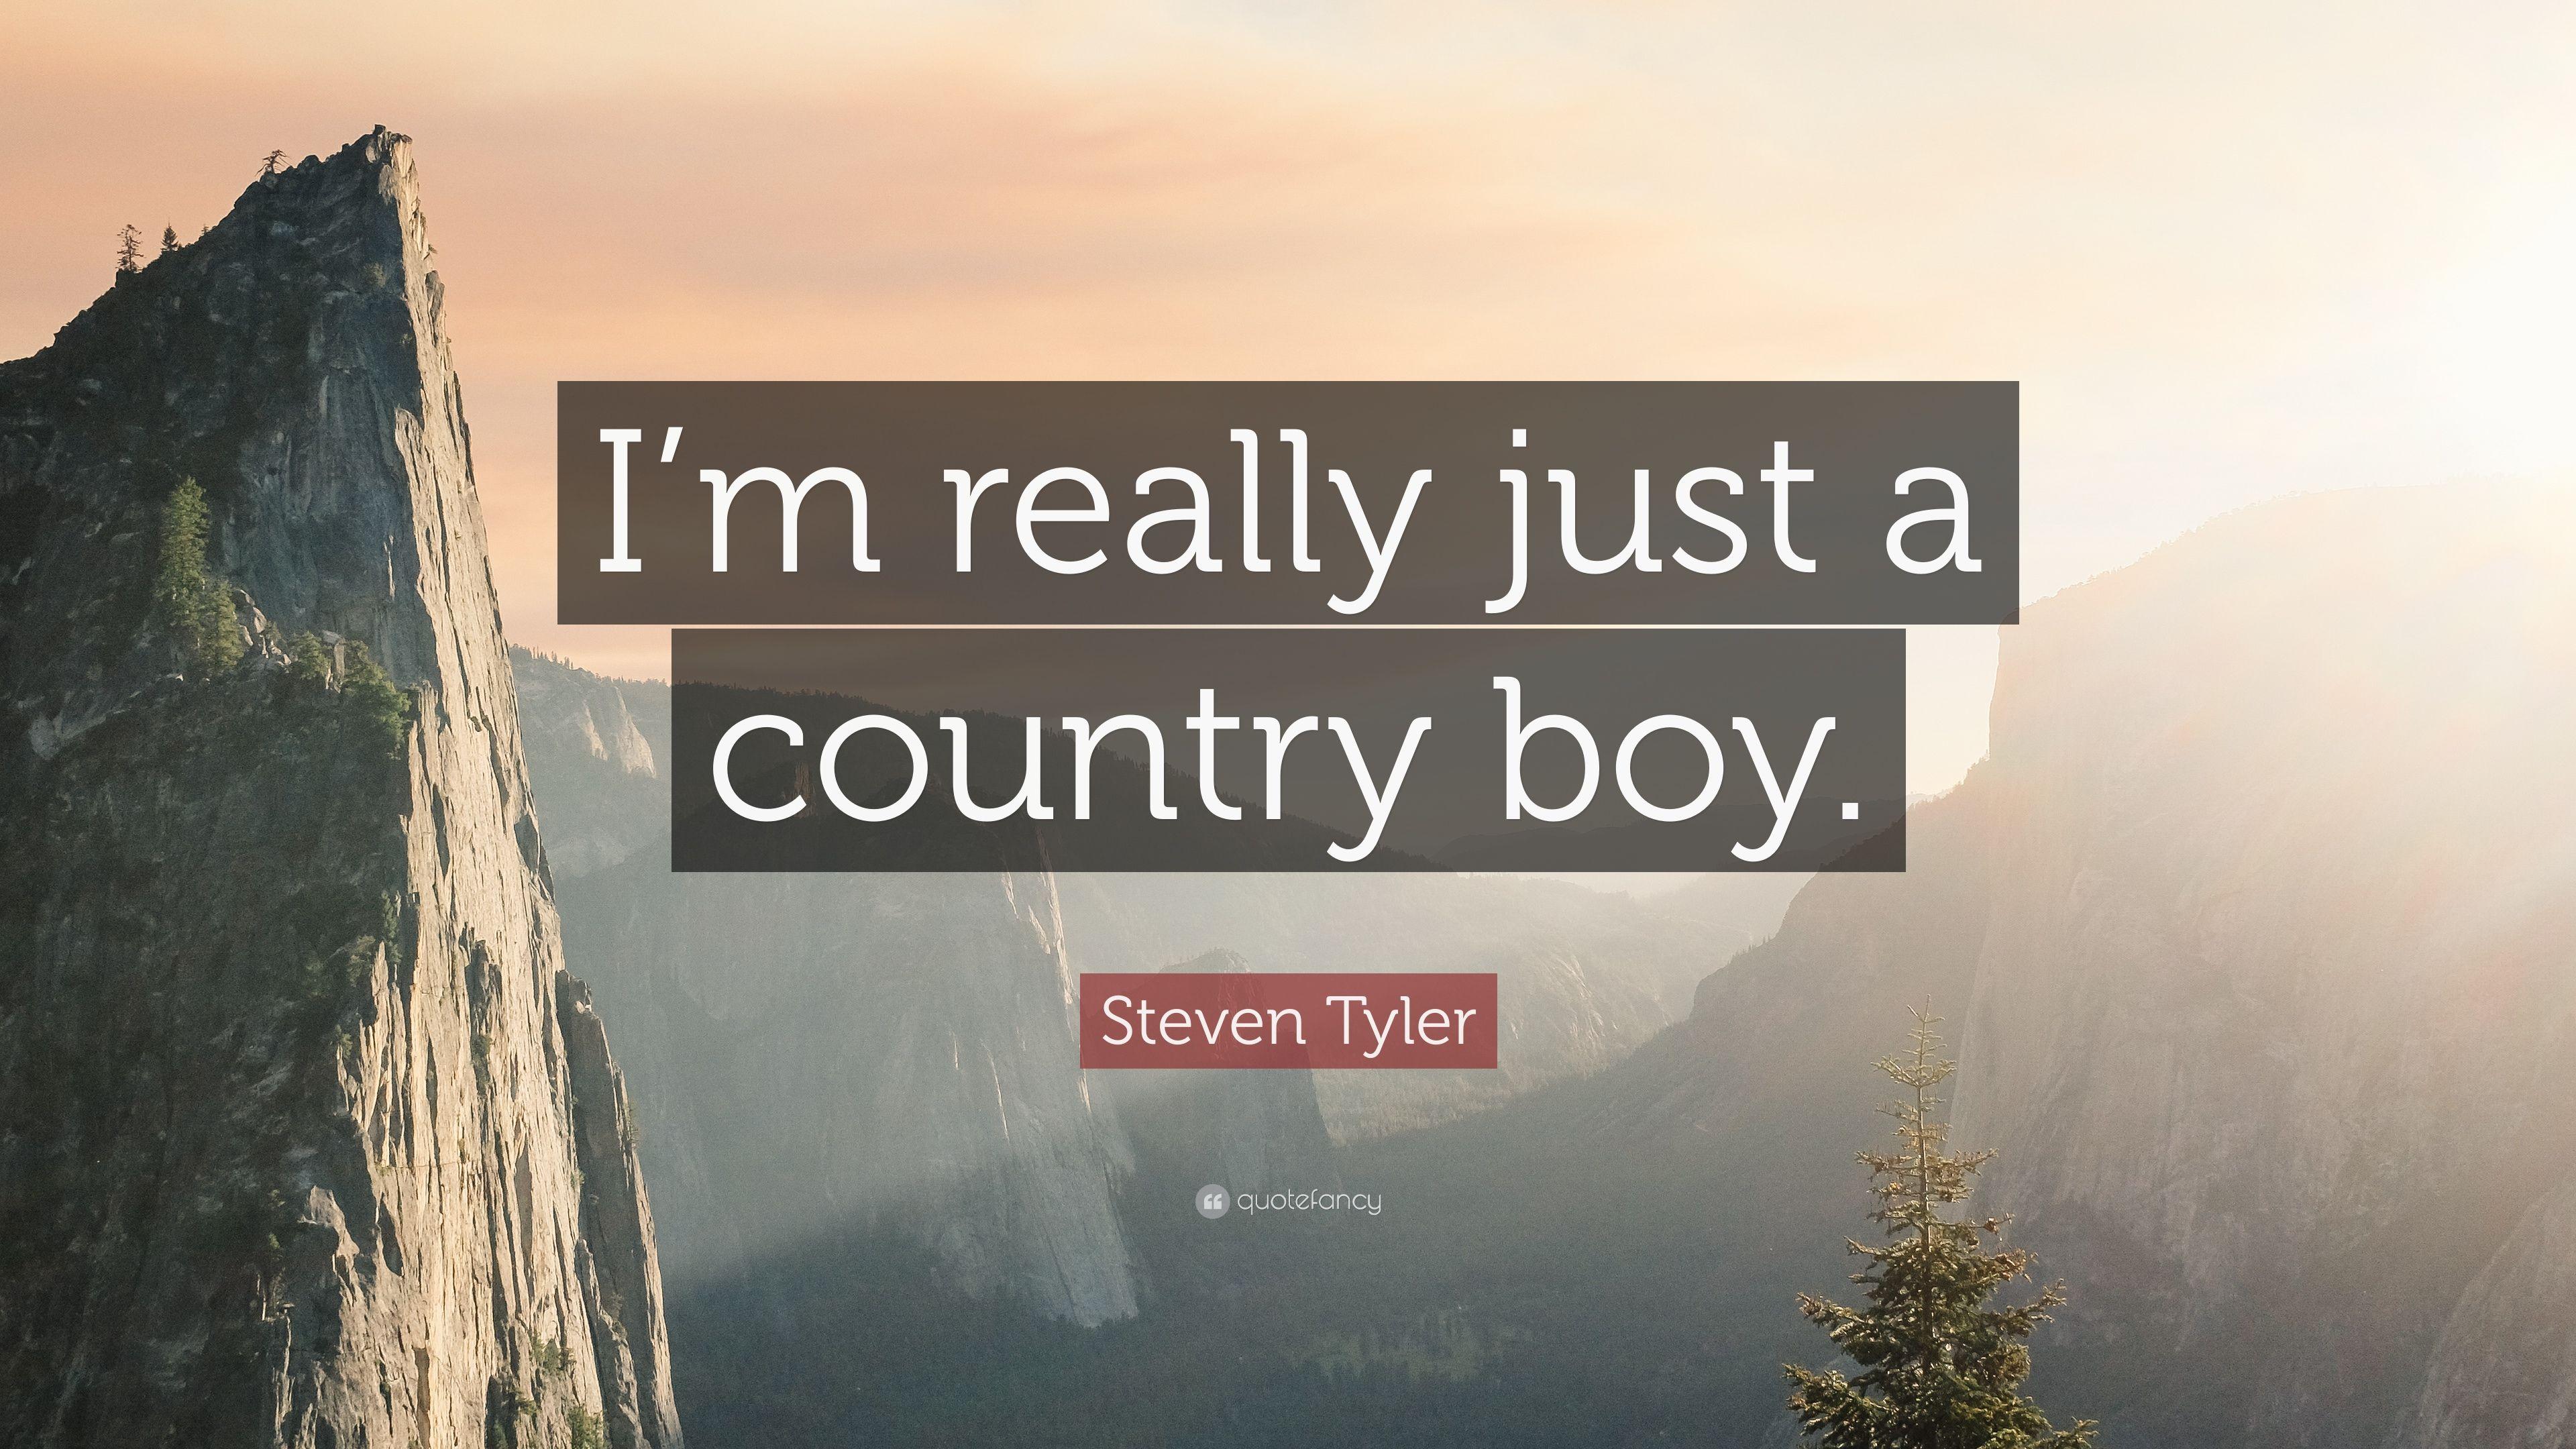 Steven Tyler Quote: “I'm really just a country boy.” 7 wallpaper